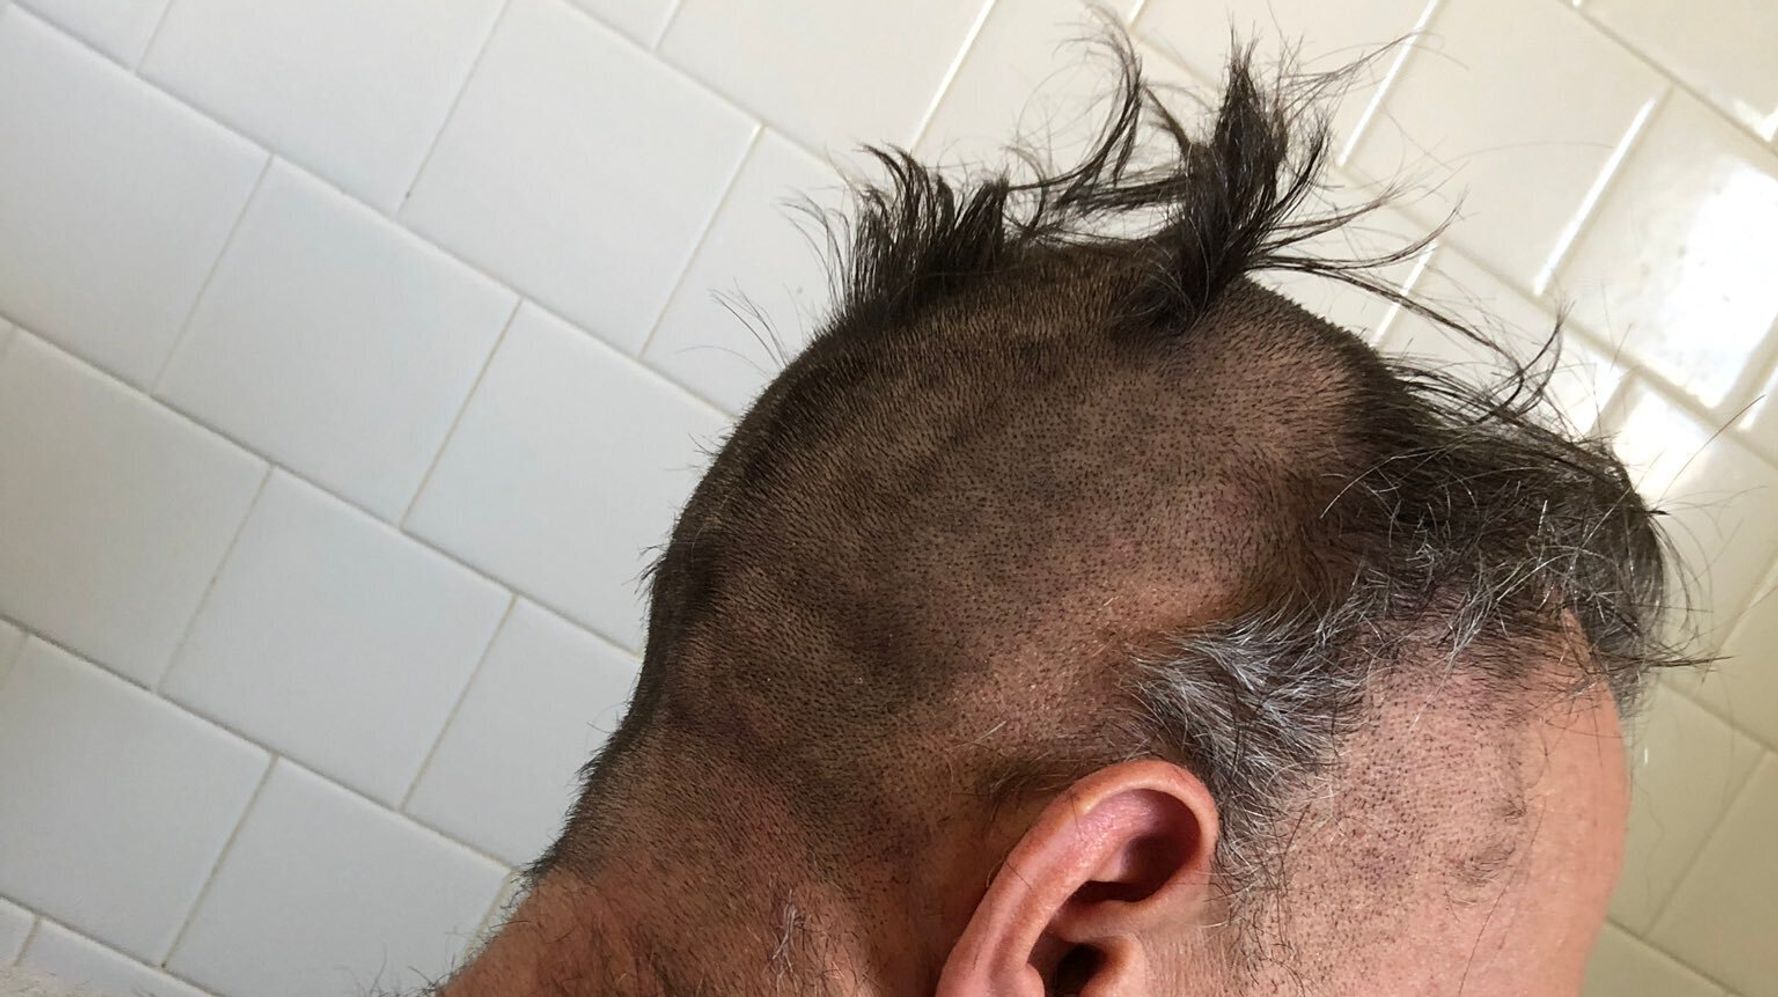 18 Photos Of Disastrous Quarantine Haircuts You Need To See